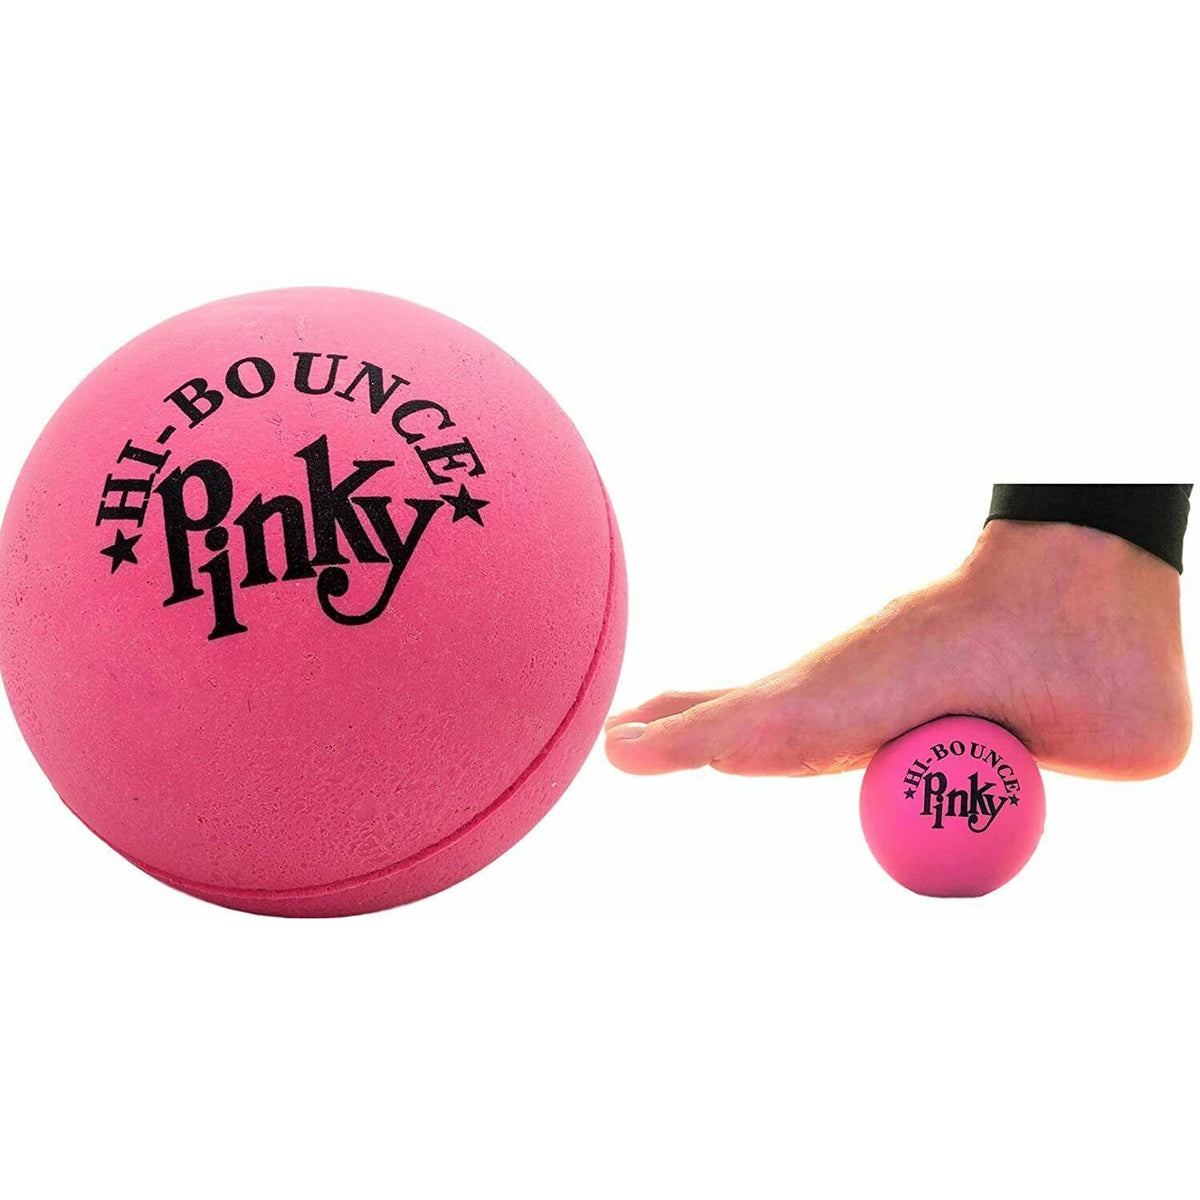 Front view of a Hi-Bounce Pinky ball and then beside it a person rolling their foot on another pinky ball.